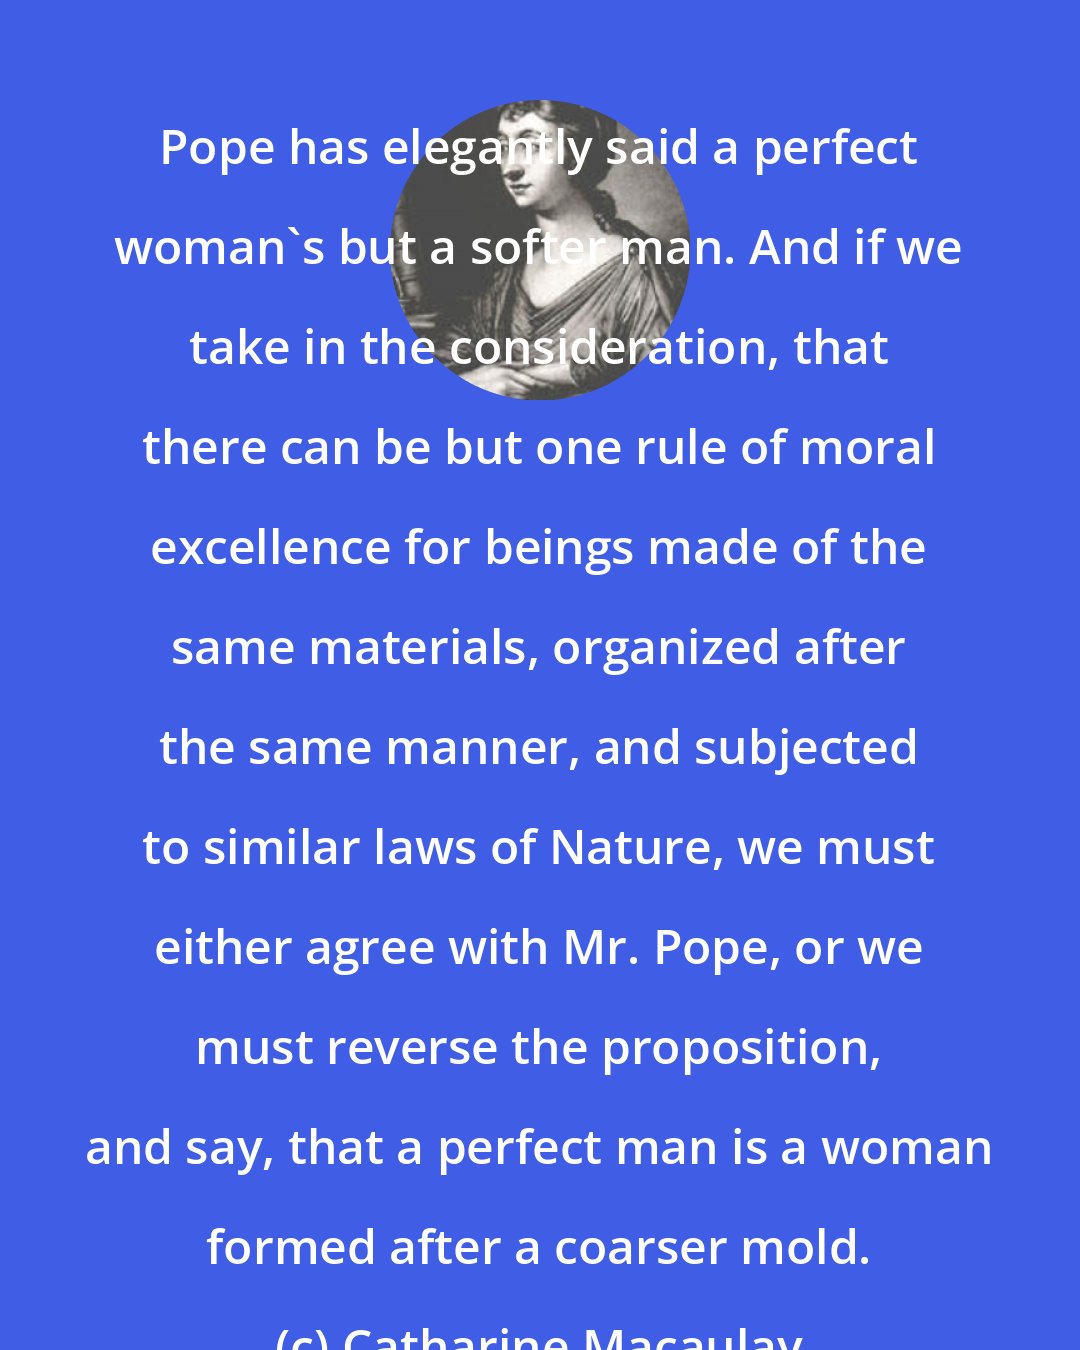 Catharine Macaulay: Pope has elegantly said a perfect woman's but a softer man. And if we take in the consideration, that there can be but one rule of moral excellence for beings made of the same materials, organized after the same manner, and subjected to similar laws of Nature, we must either agree with Mr. Pope, or we must reverse the proposition, and say, that a perfect man is a woman formed after a coarser mold.